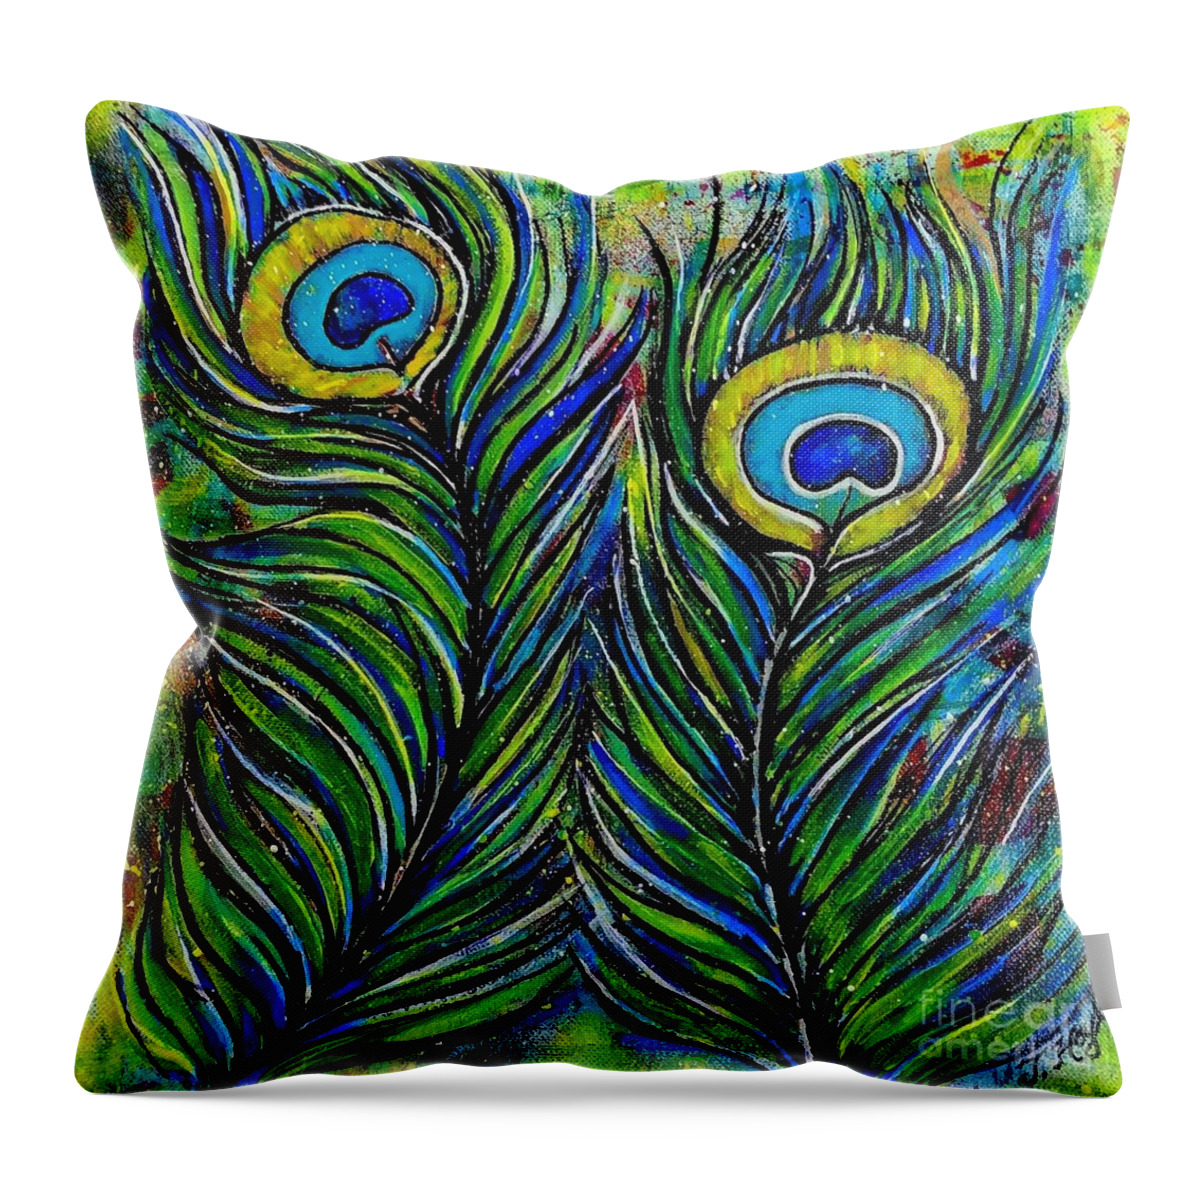 Julie-hoyle Throw Pillow featuring the mixed media True Colors by Julie Hoyle